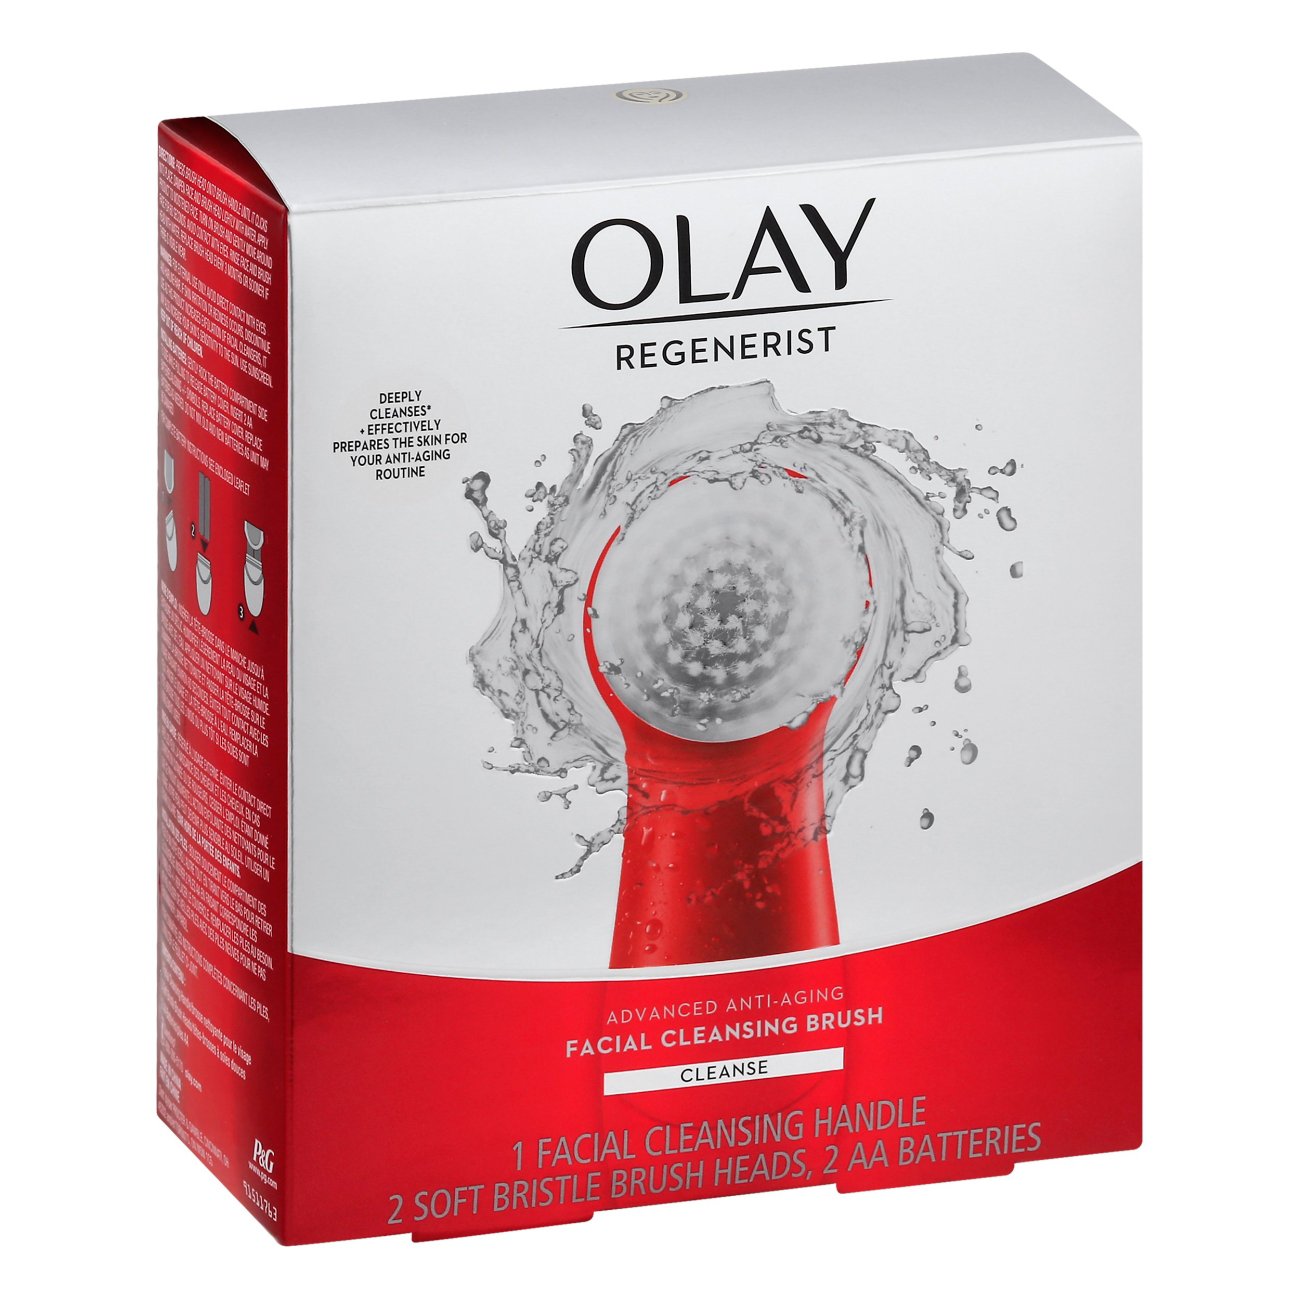 Olay Olay Regenerist Face Cleansing Device - Shop & Skin Care at